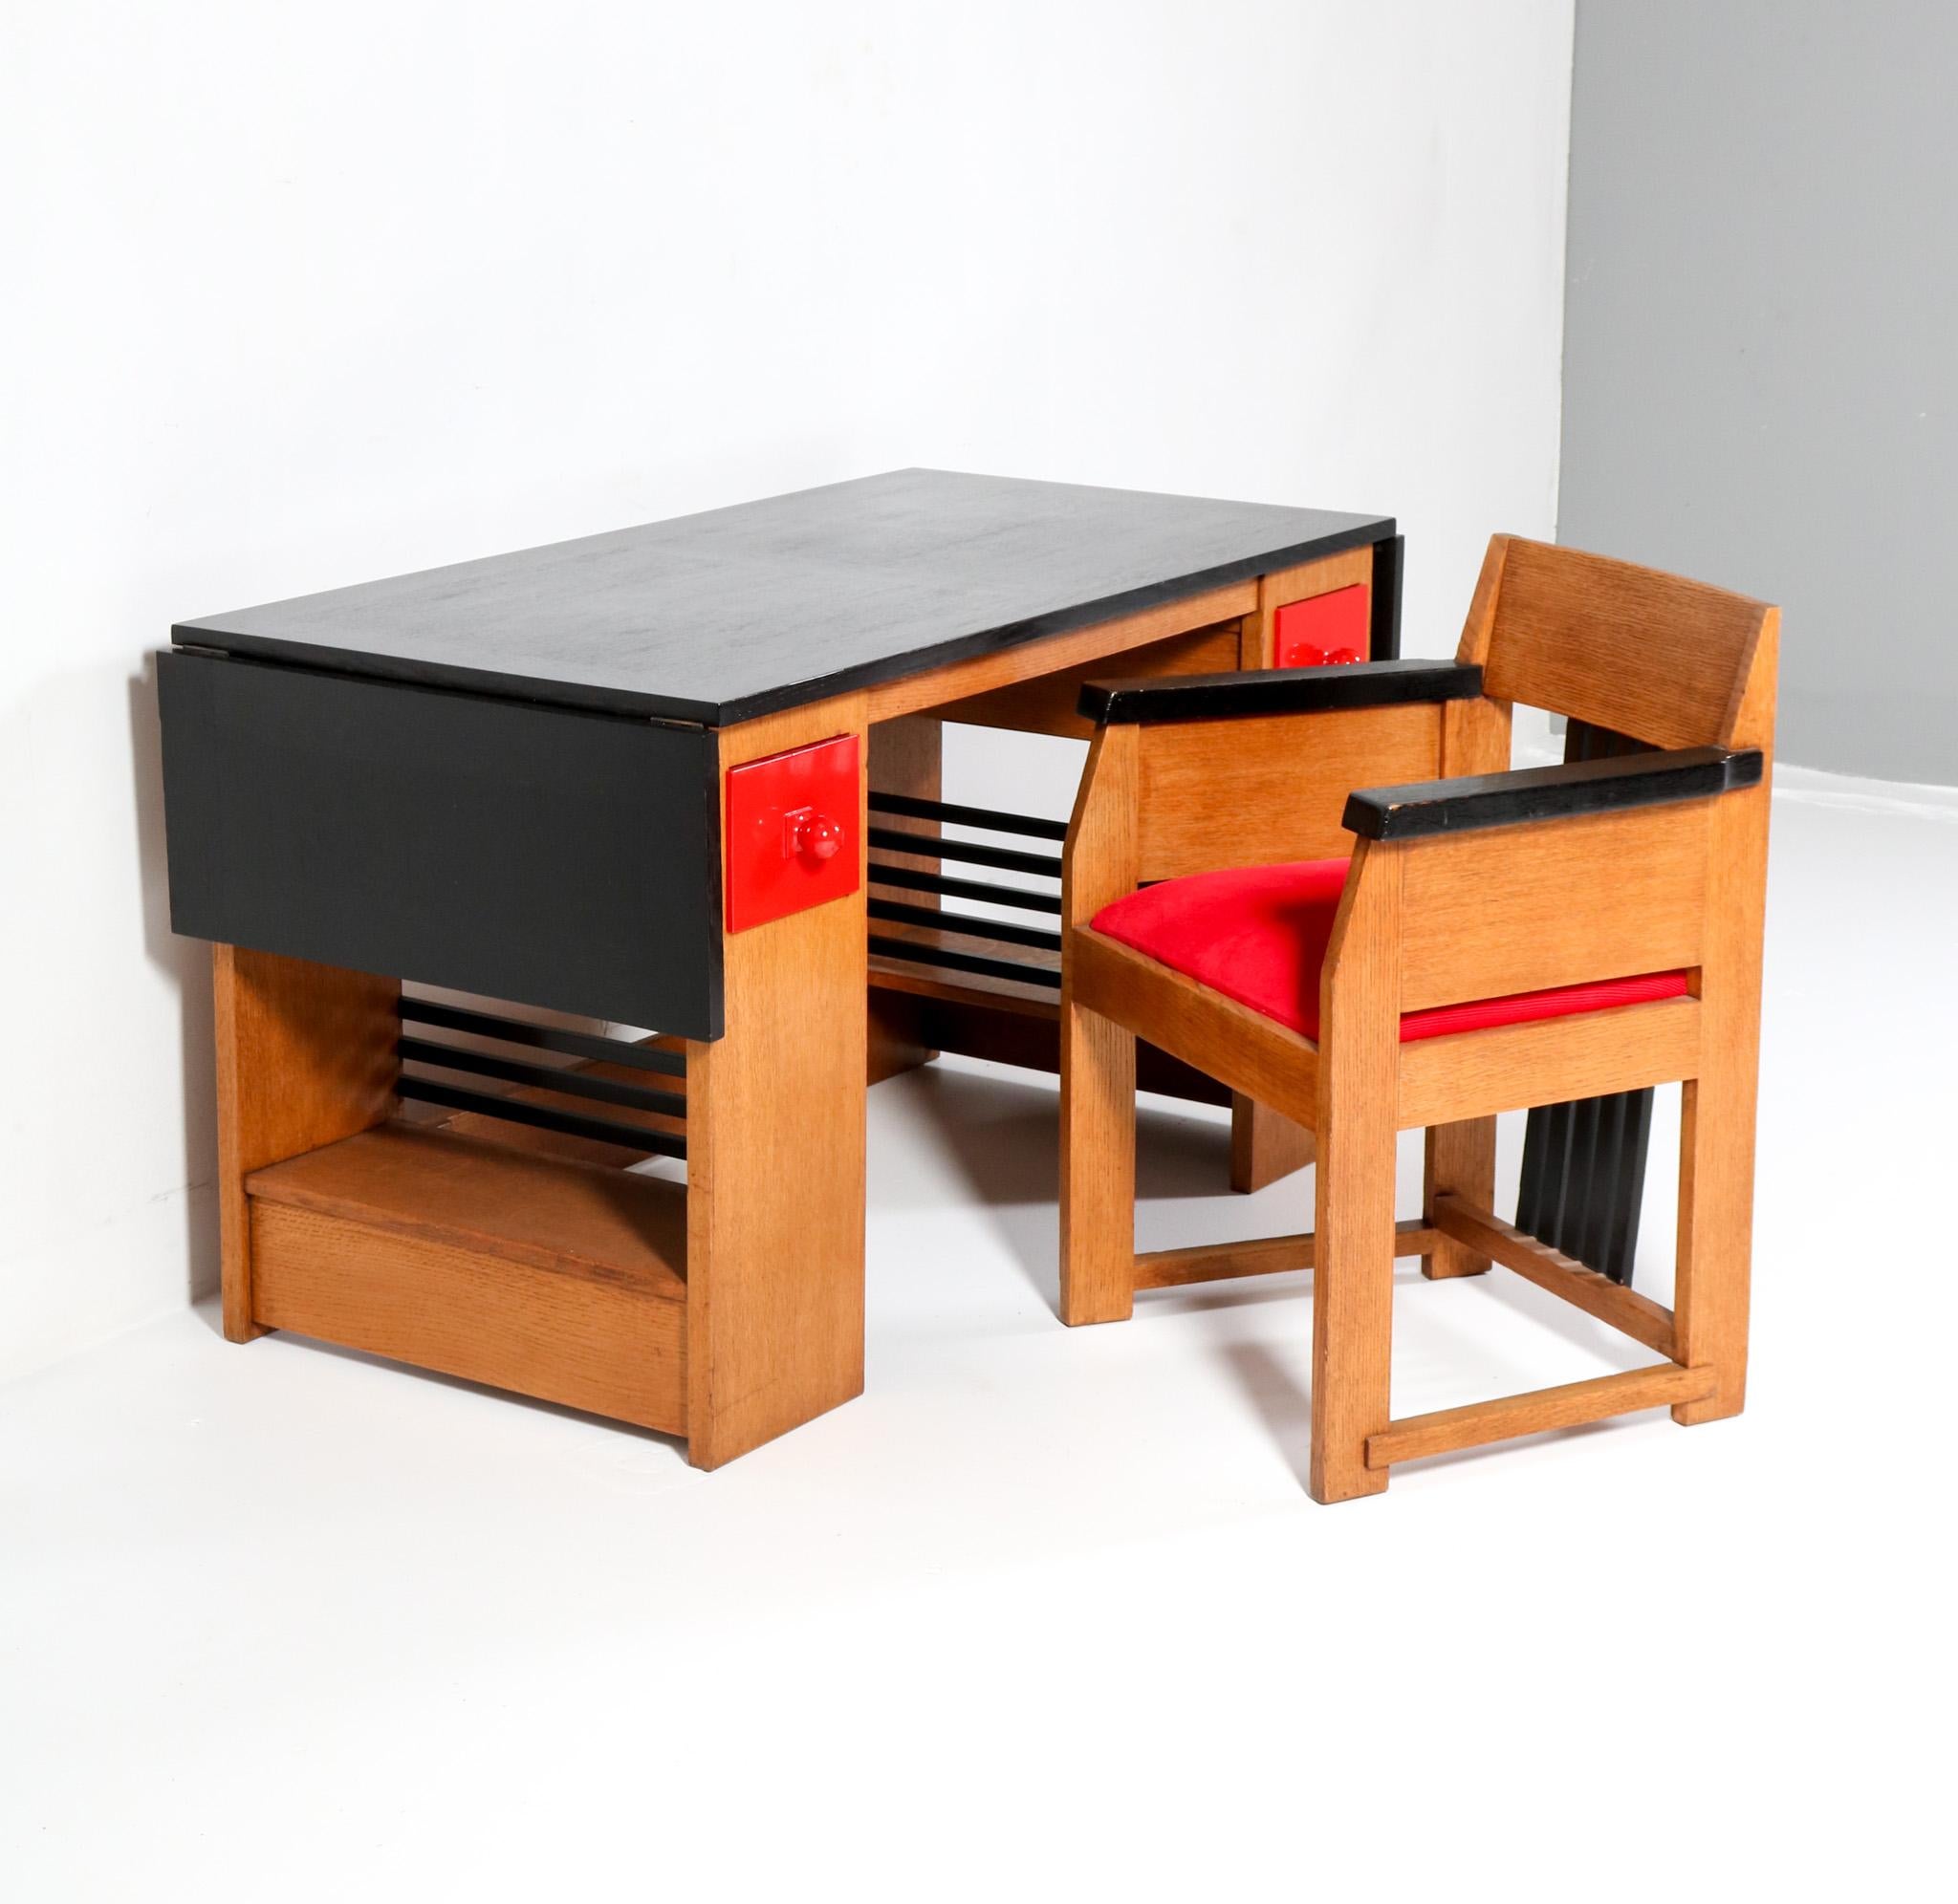  Art Deco Modernist Desk or Writing Table by Hendrik Wouda for Pander, 1920s For Sale 4